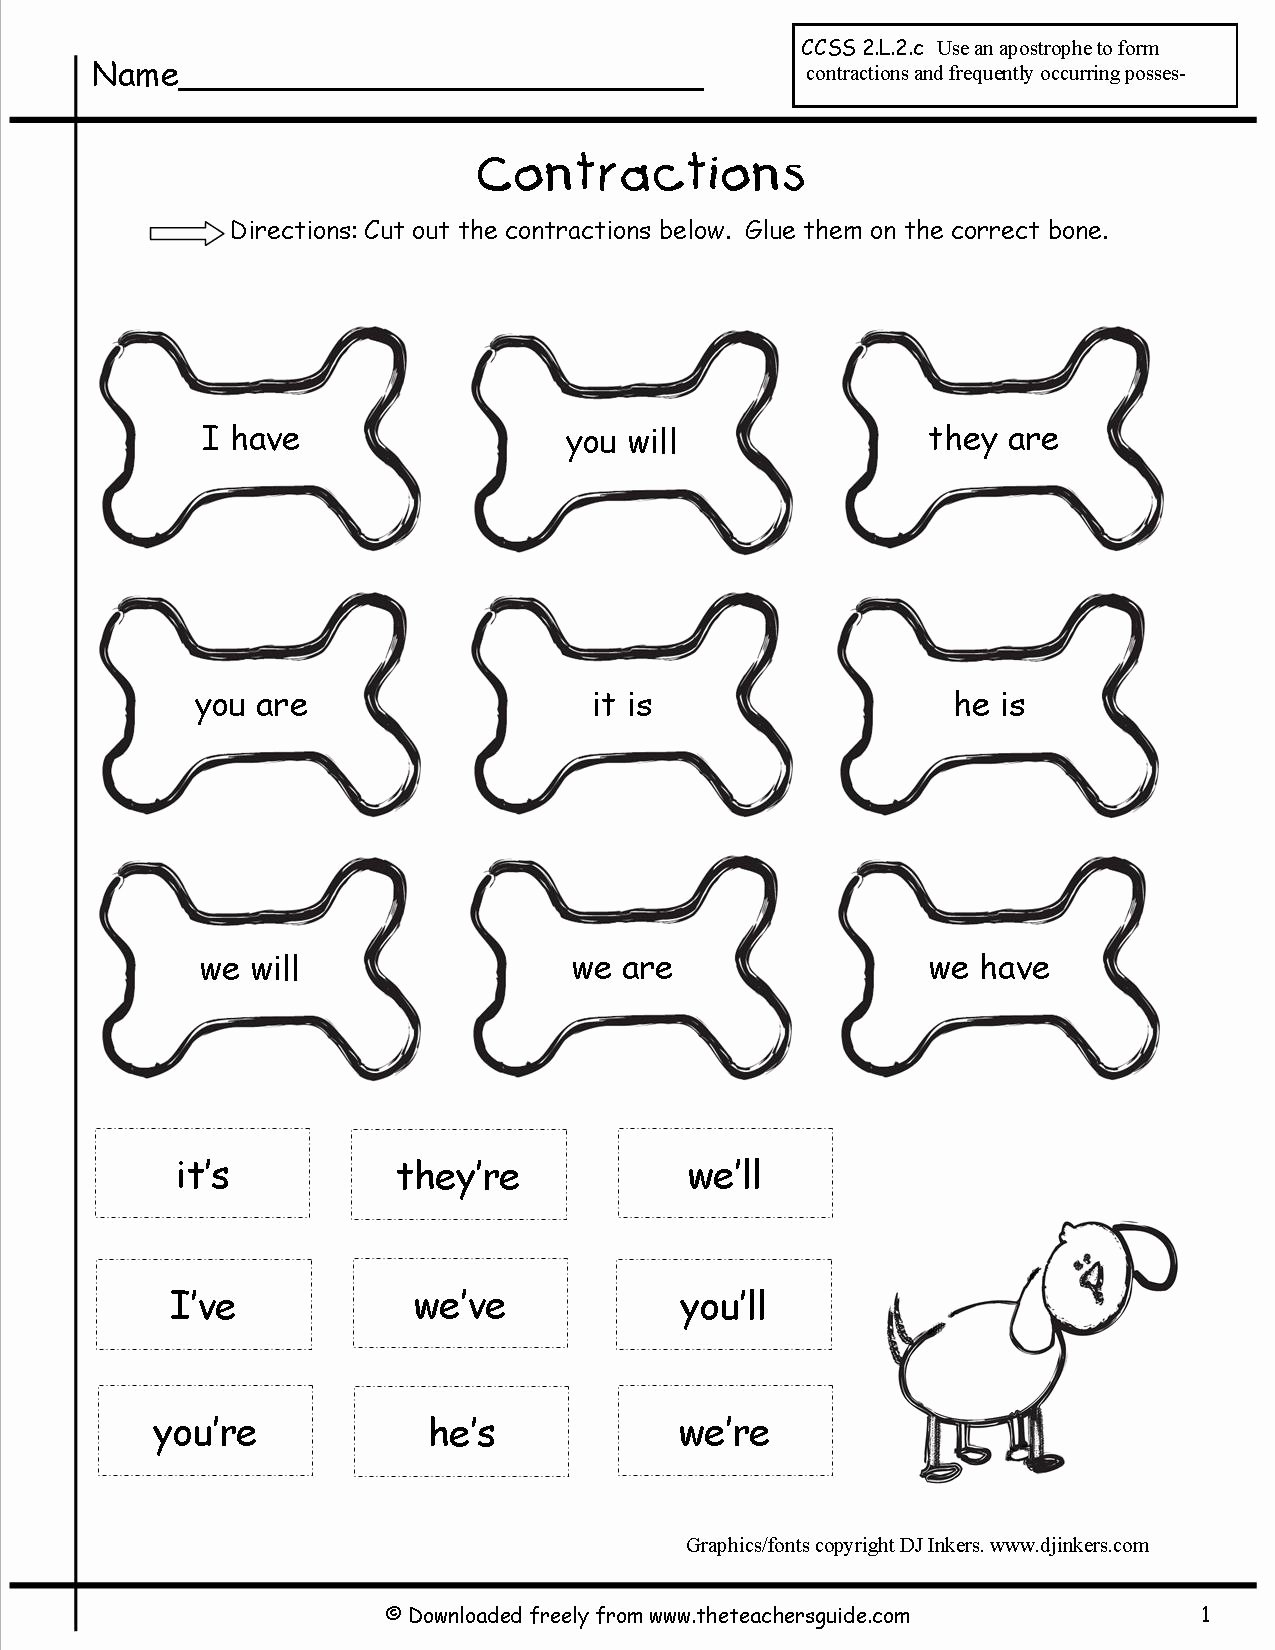 Contractions Worksheet 2nd Grade Unique Contractions Worksheets From the Teacher S Guide